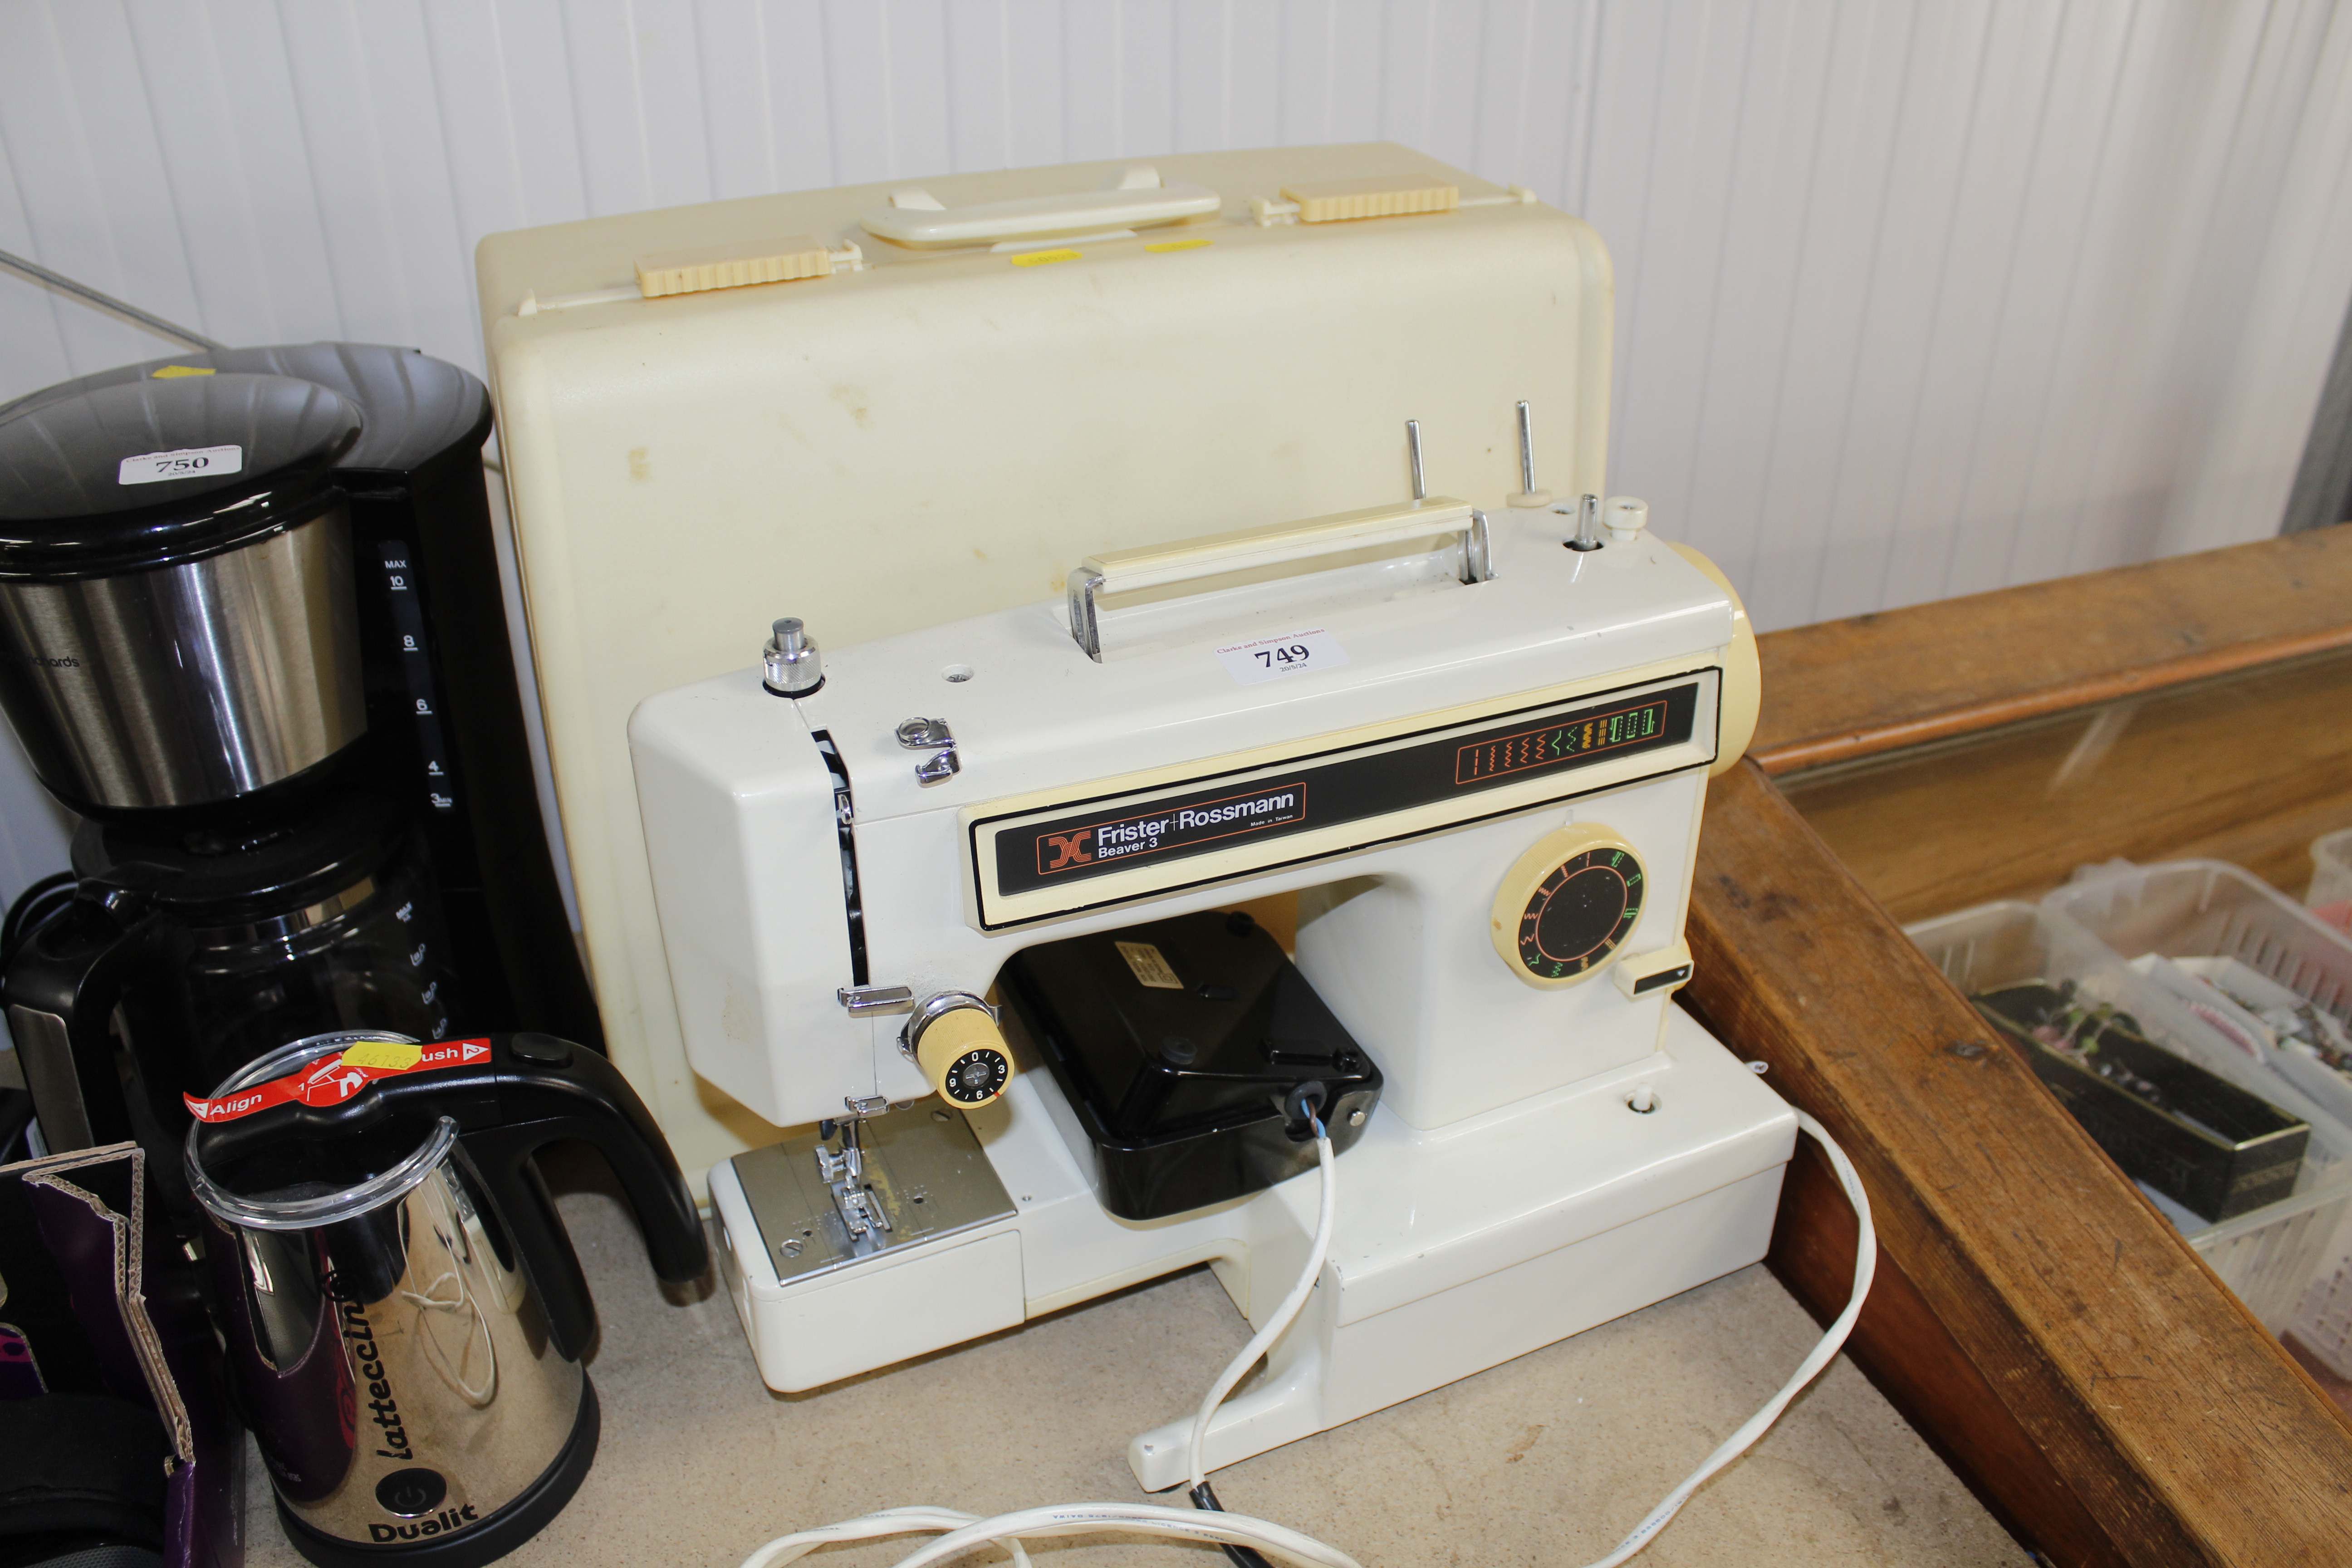 A Frister & Rossman sewing machine, sold as a coll